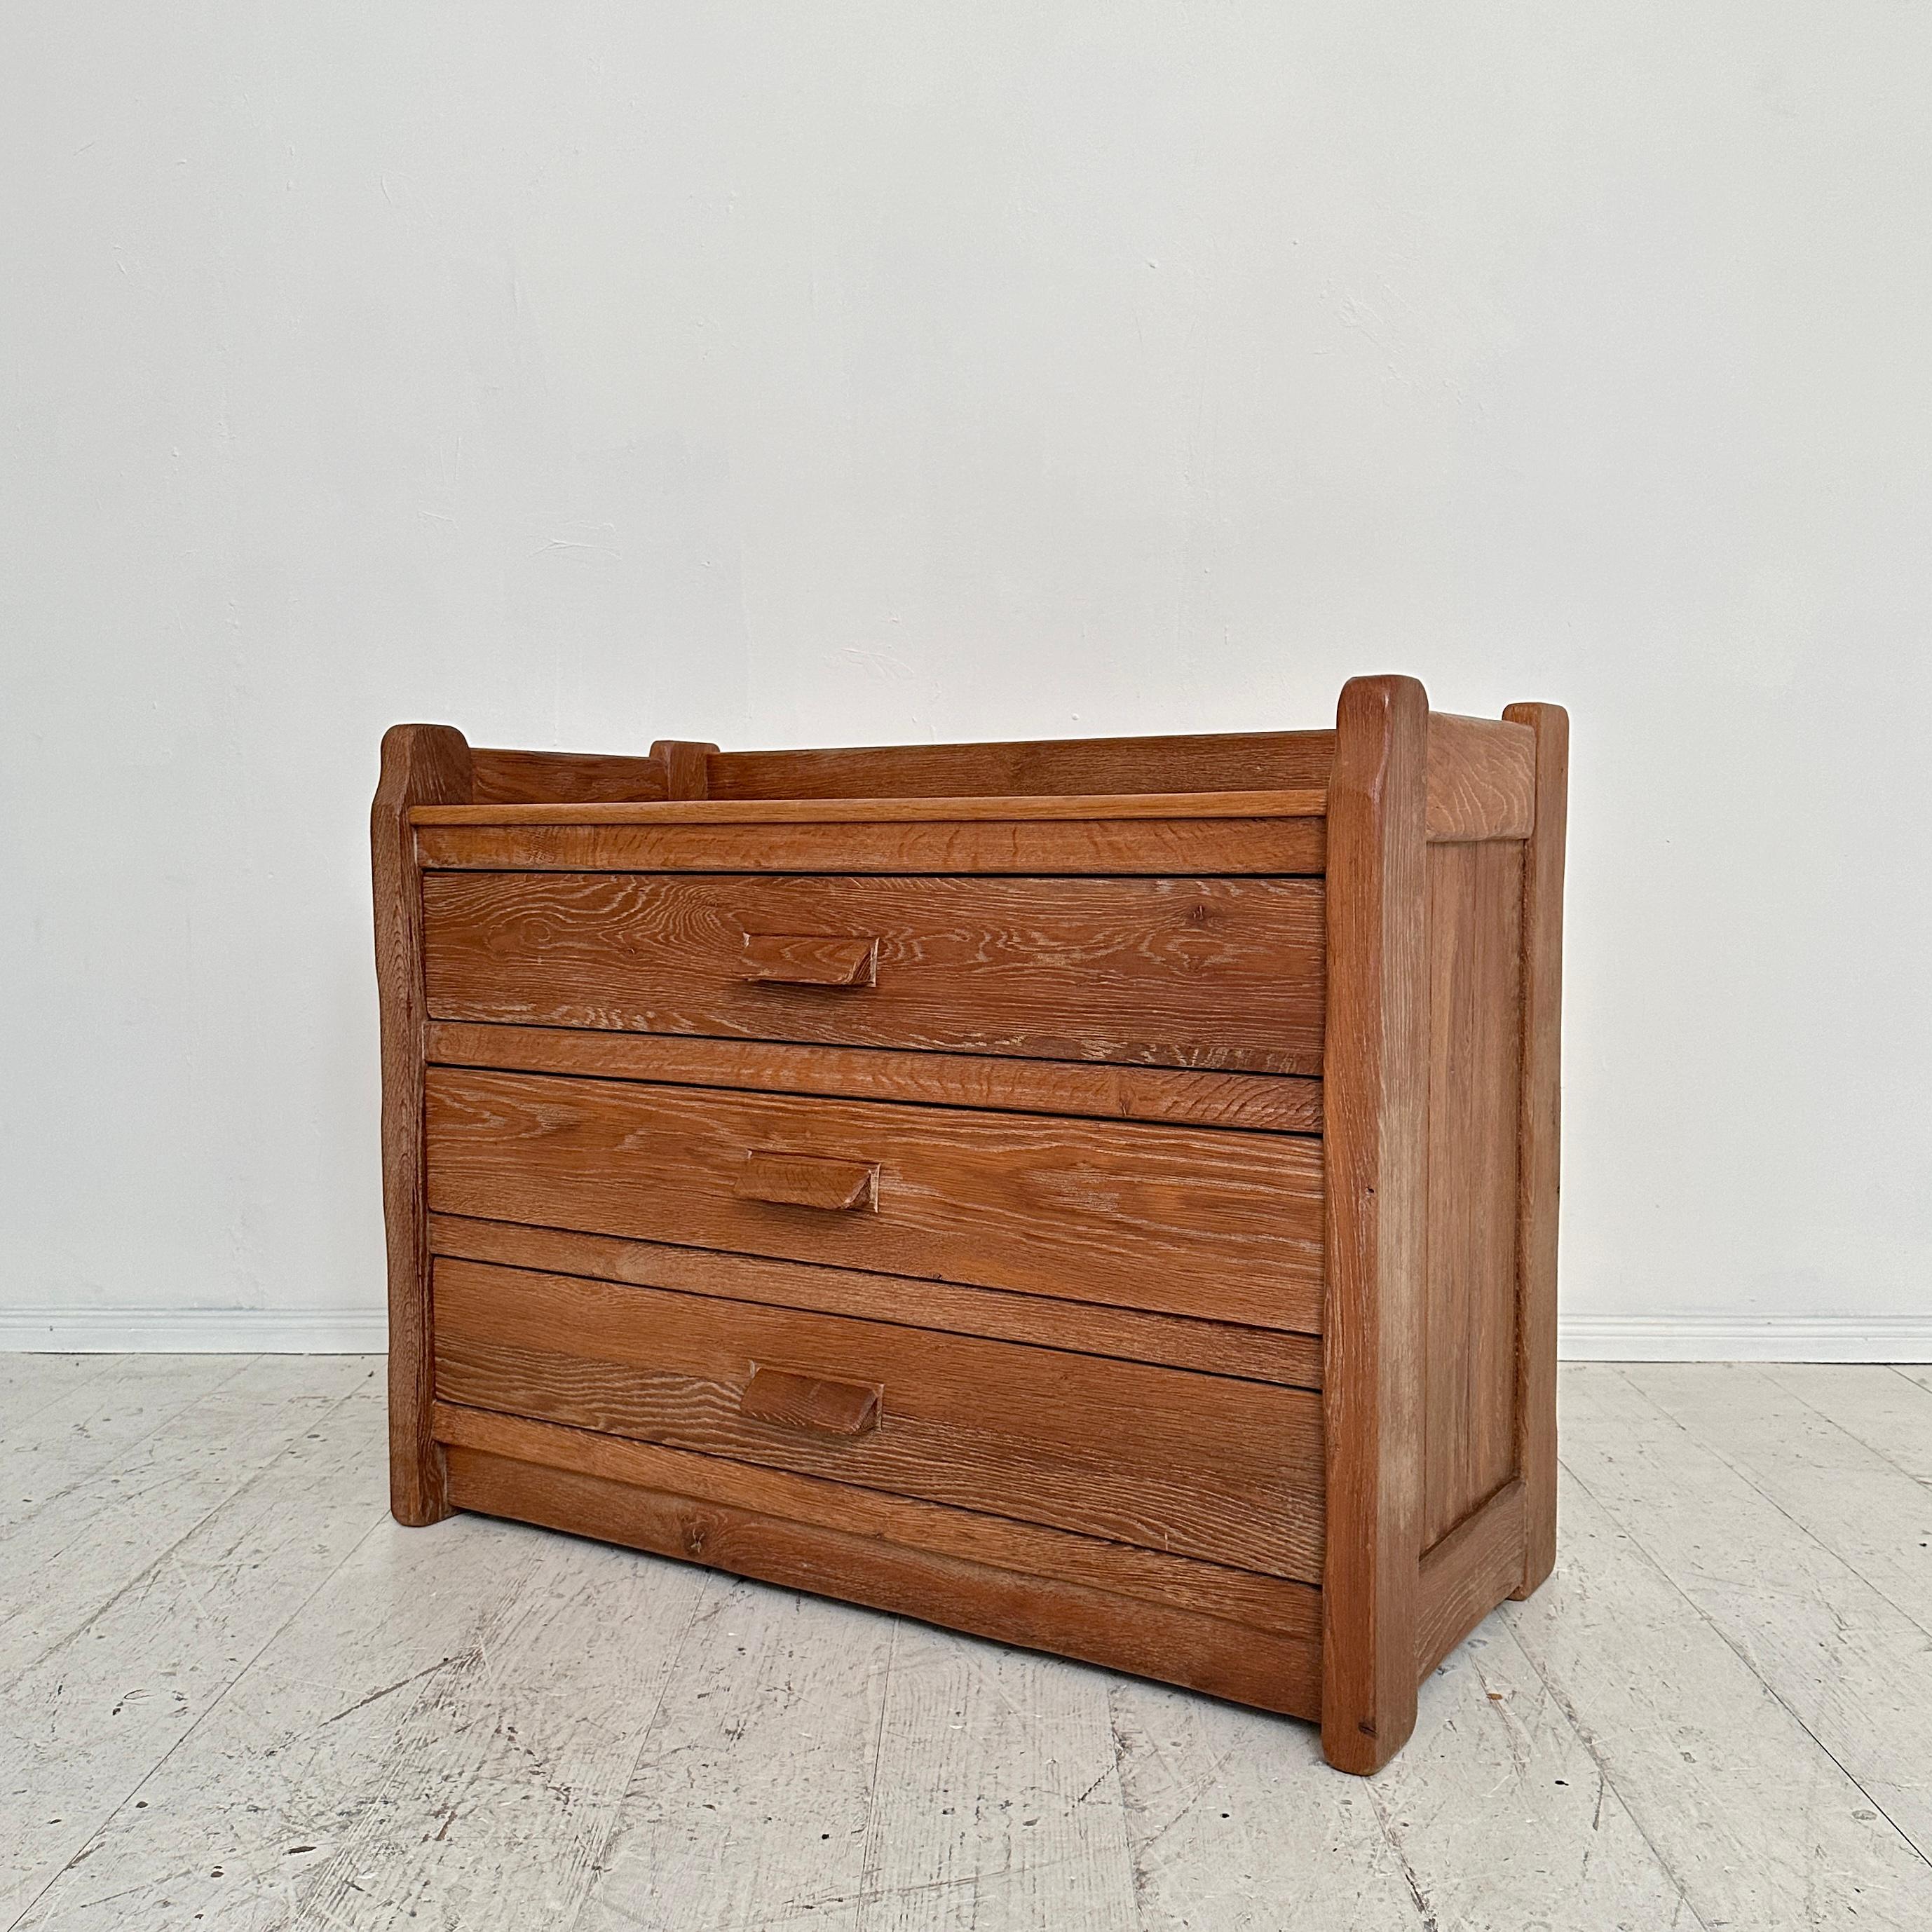 1970s Brutalist Chest of Drawers in Solid Washed Oak by de Puydt, around 1974 For Sale 10